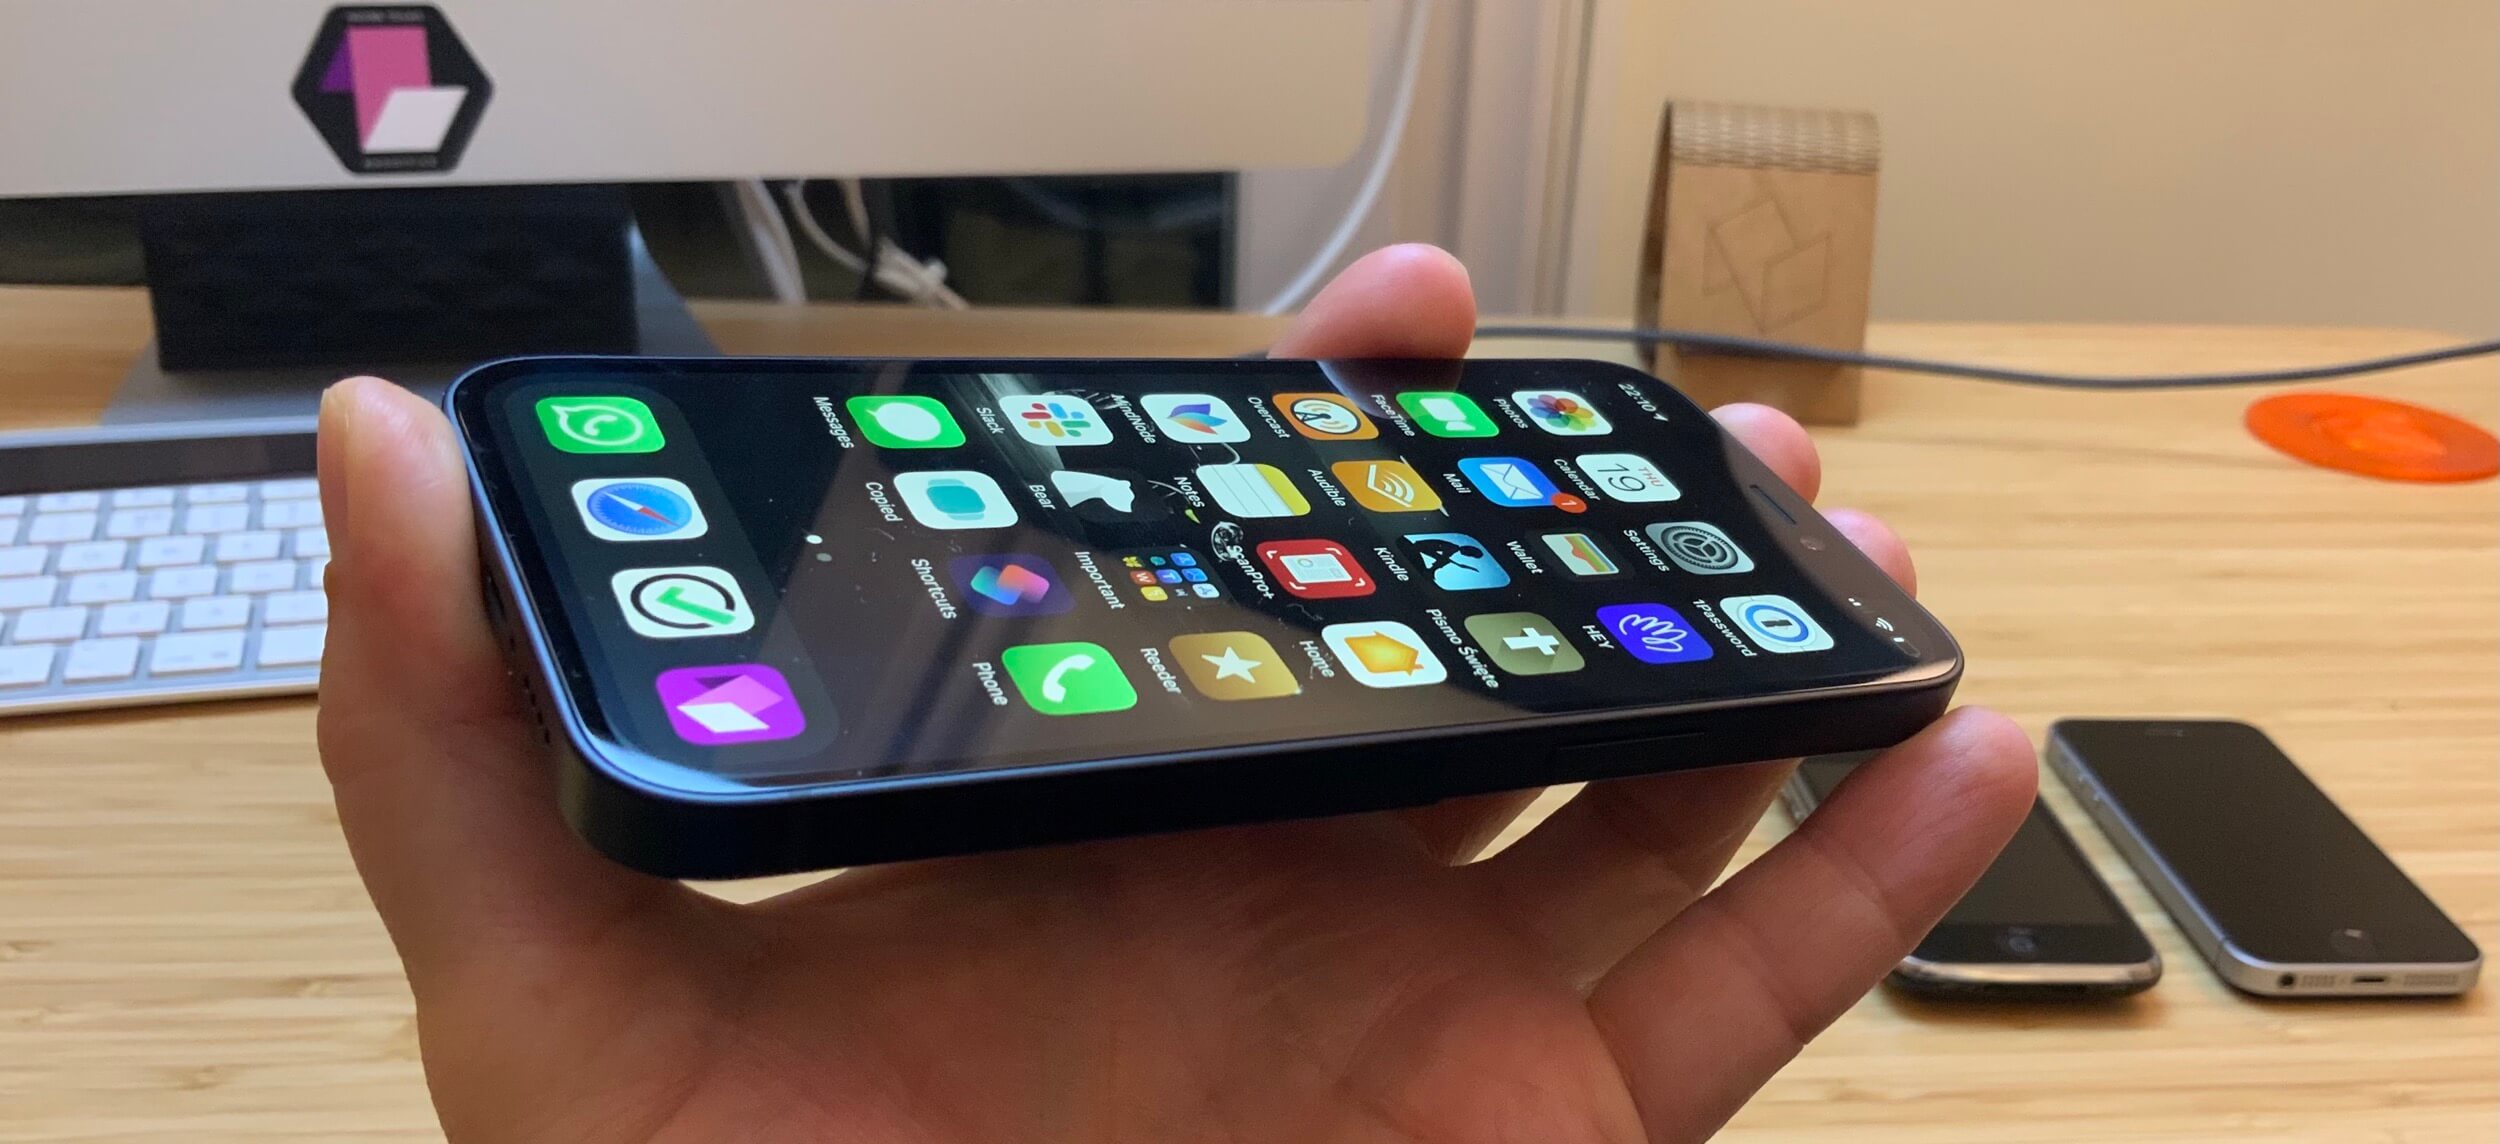 First impressions of the ultimate cuteness - the iPhone 12 Mini